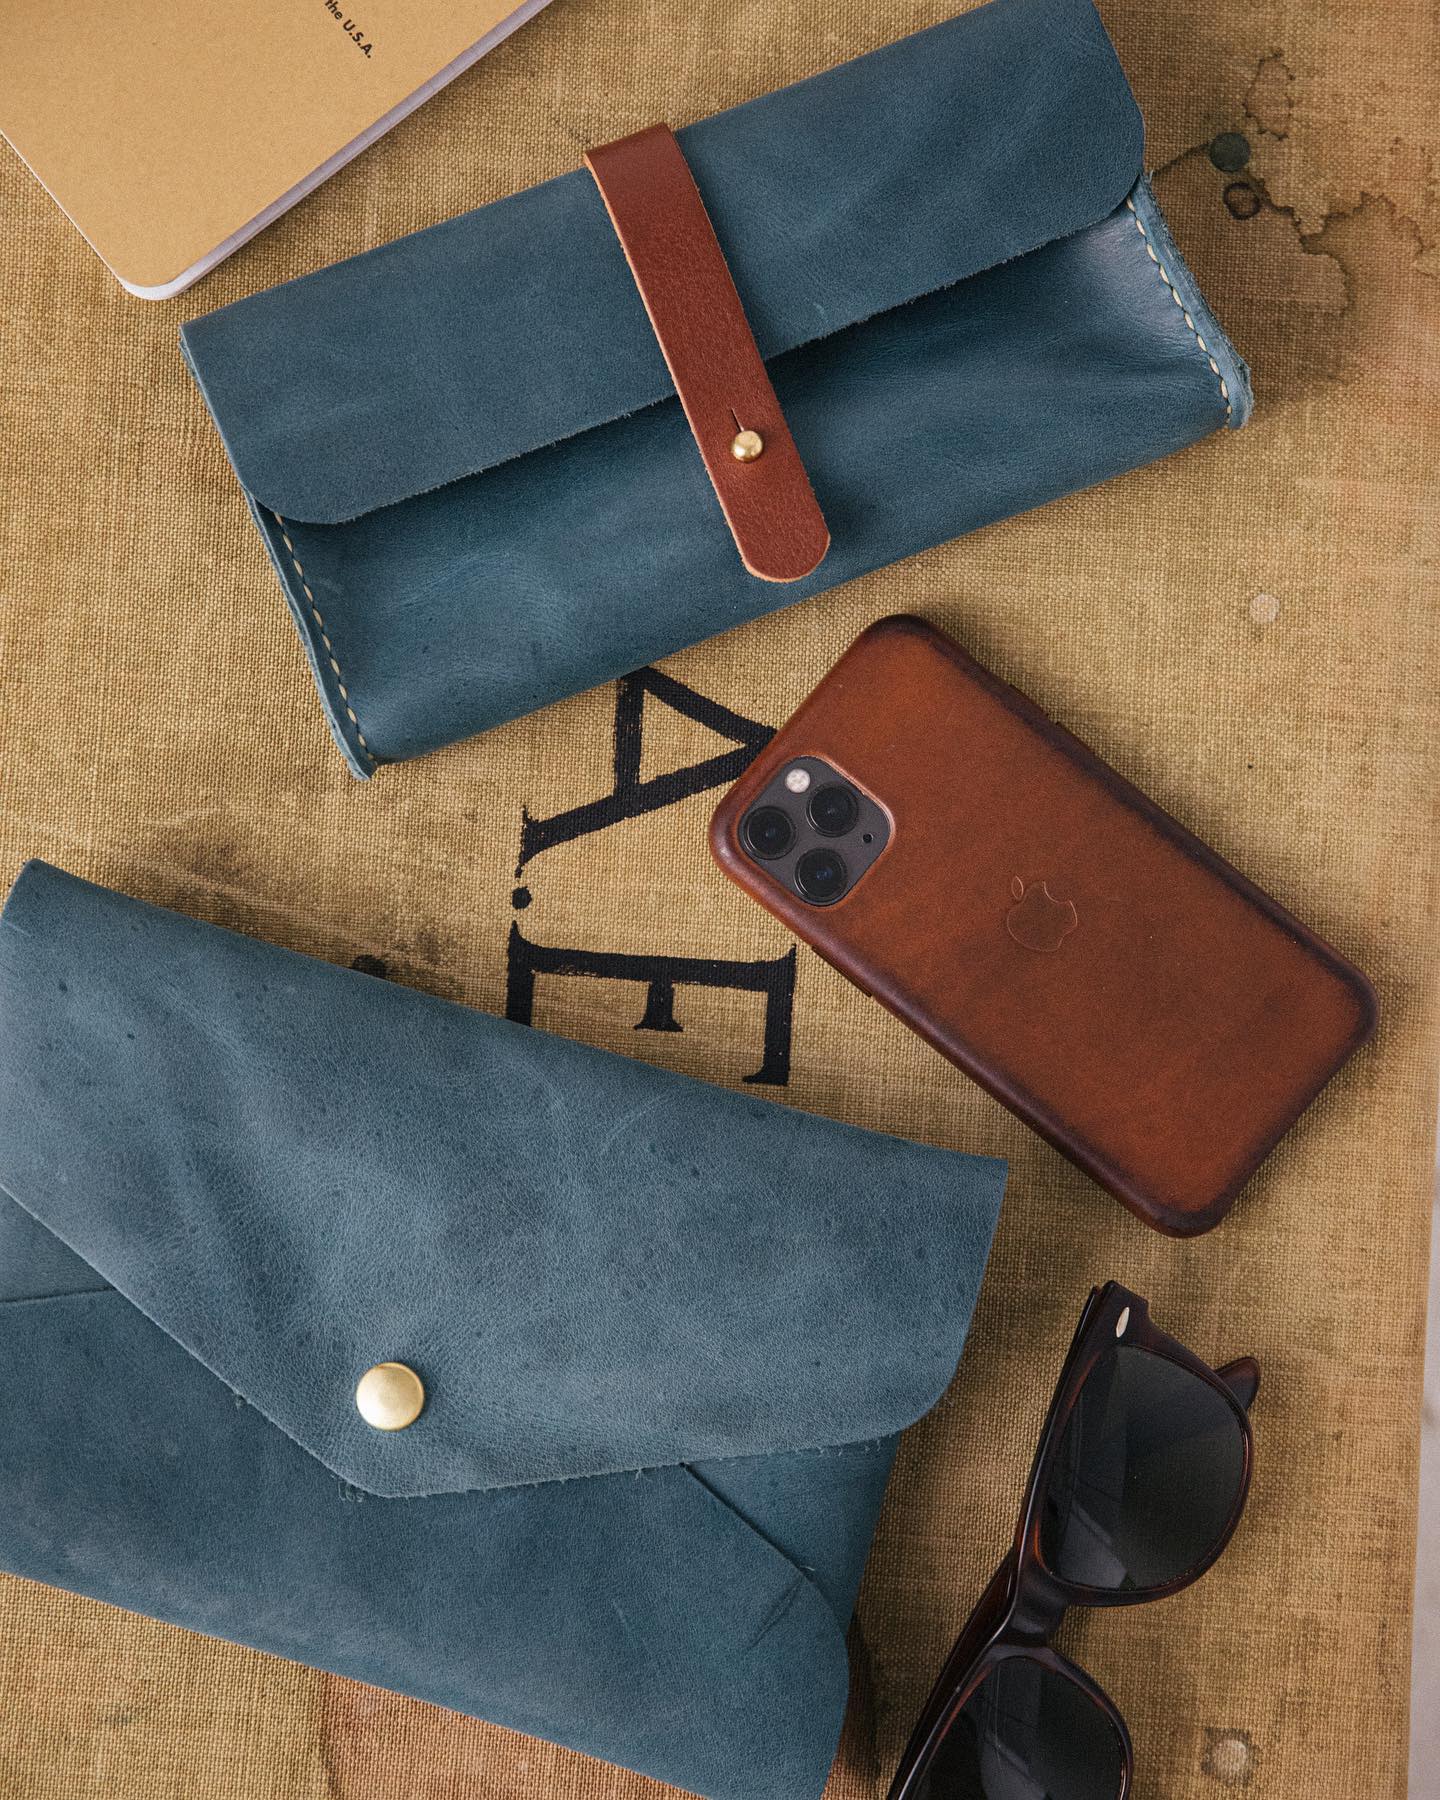 Atlantic Blue leather clutch bags | leather clutches made in the USA